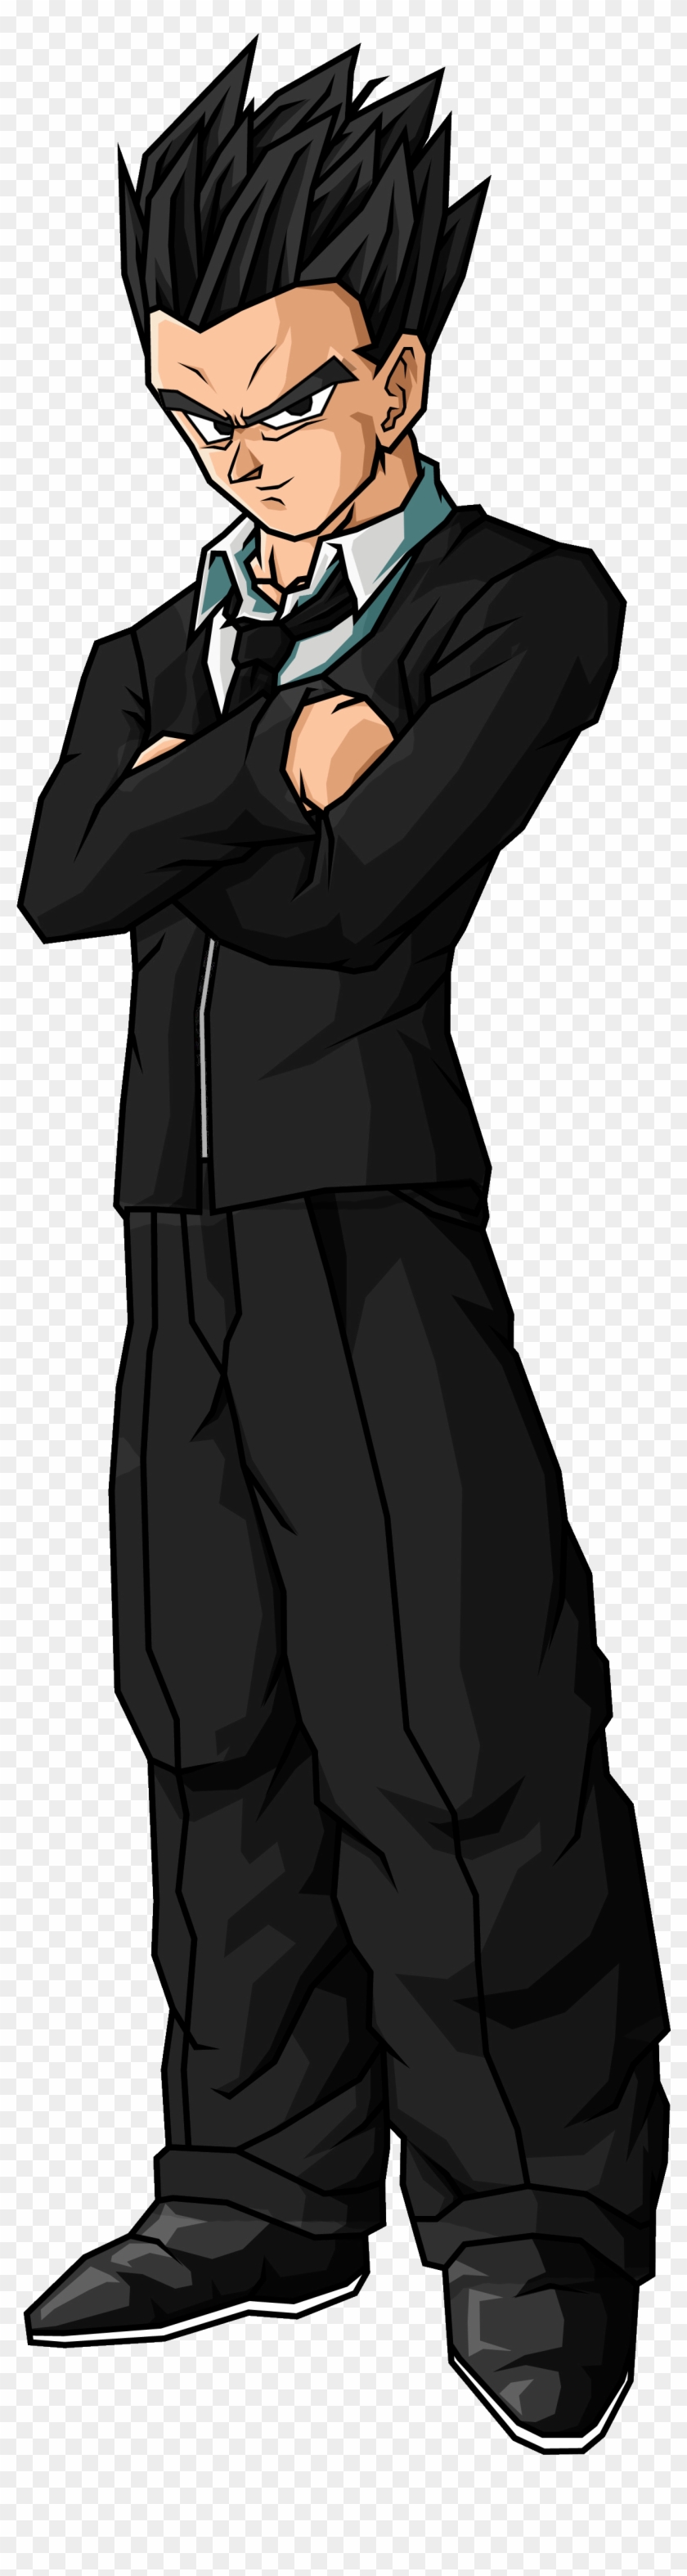 Goten Http - Gohan Con Traje Formal, HD Png Download - 2094x4761(#6311704)  - PngFind